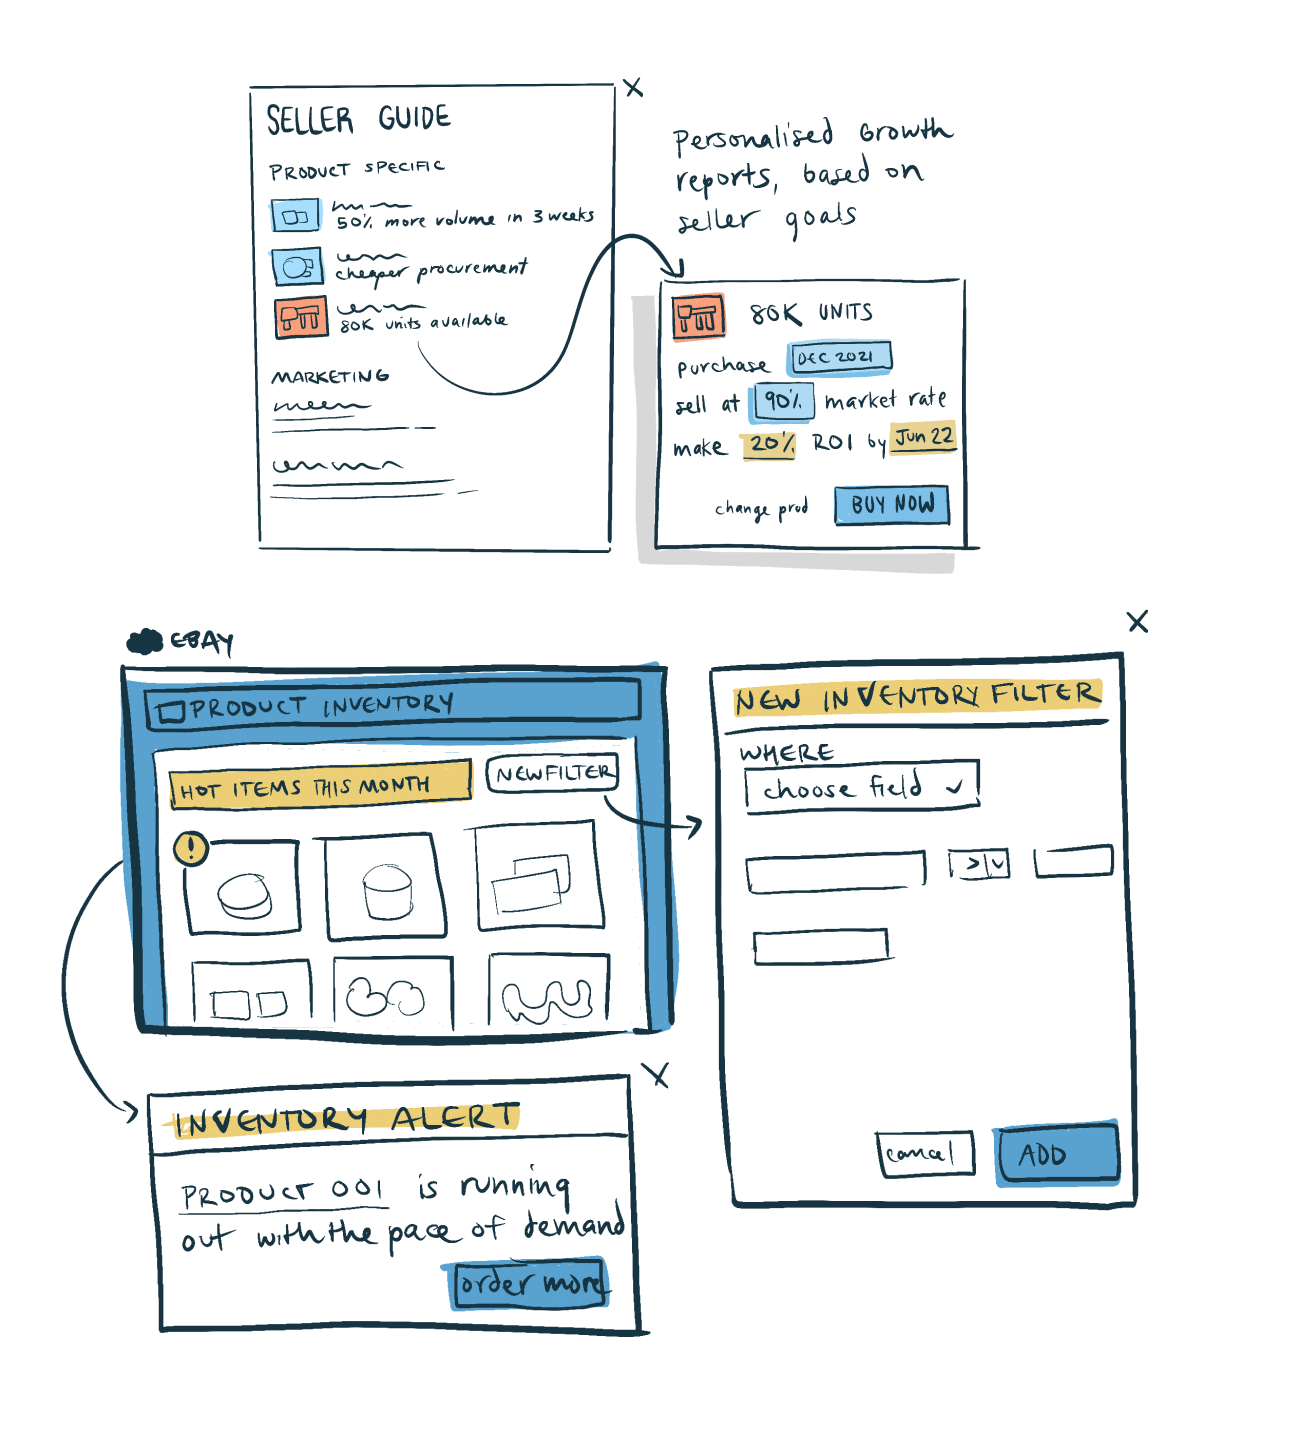 customized growth report app sketches, app popup layering with helpful prompts for users of online selling services